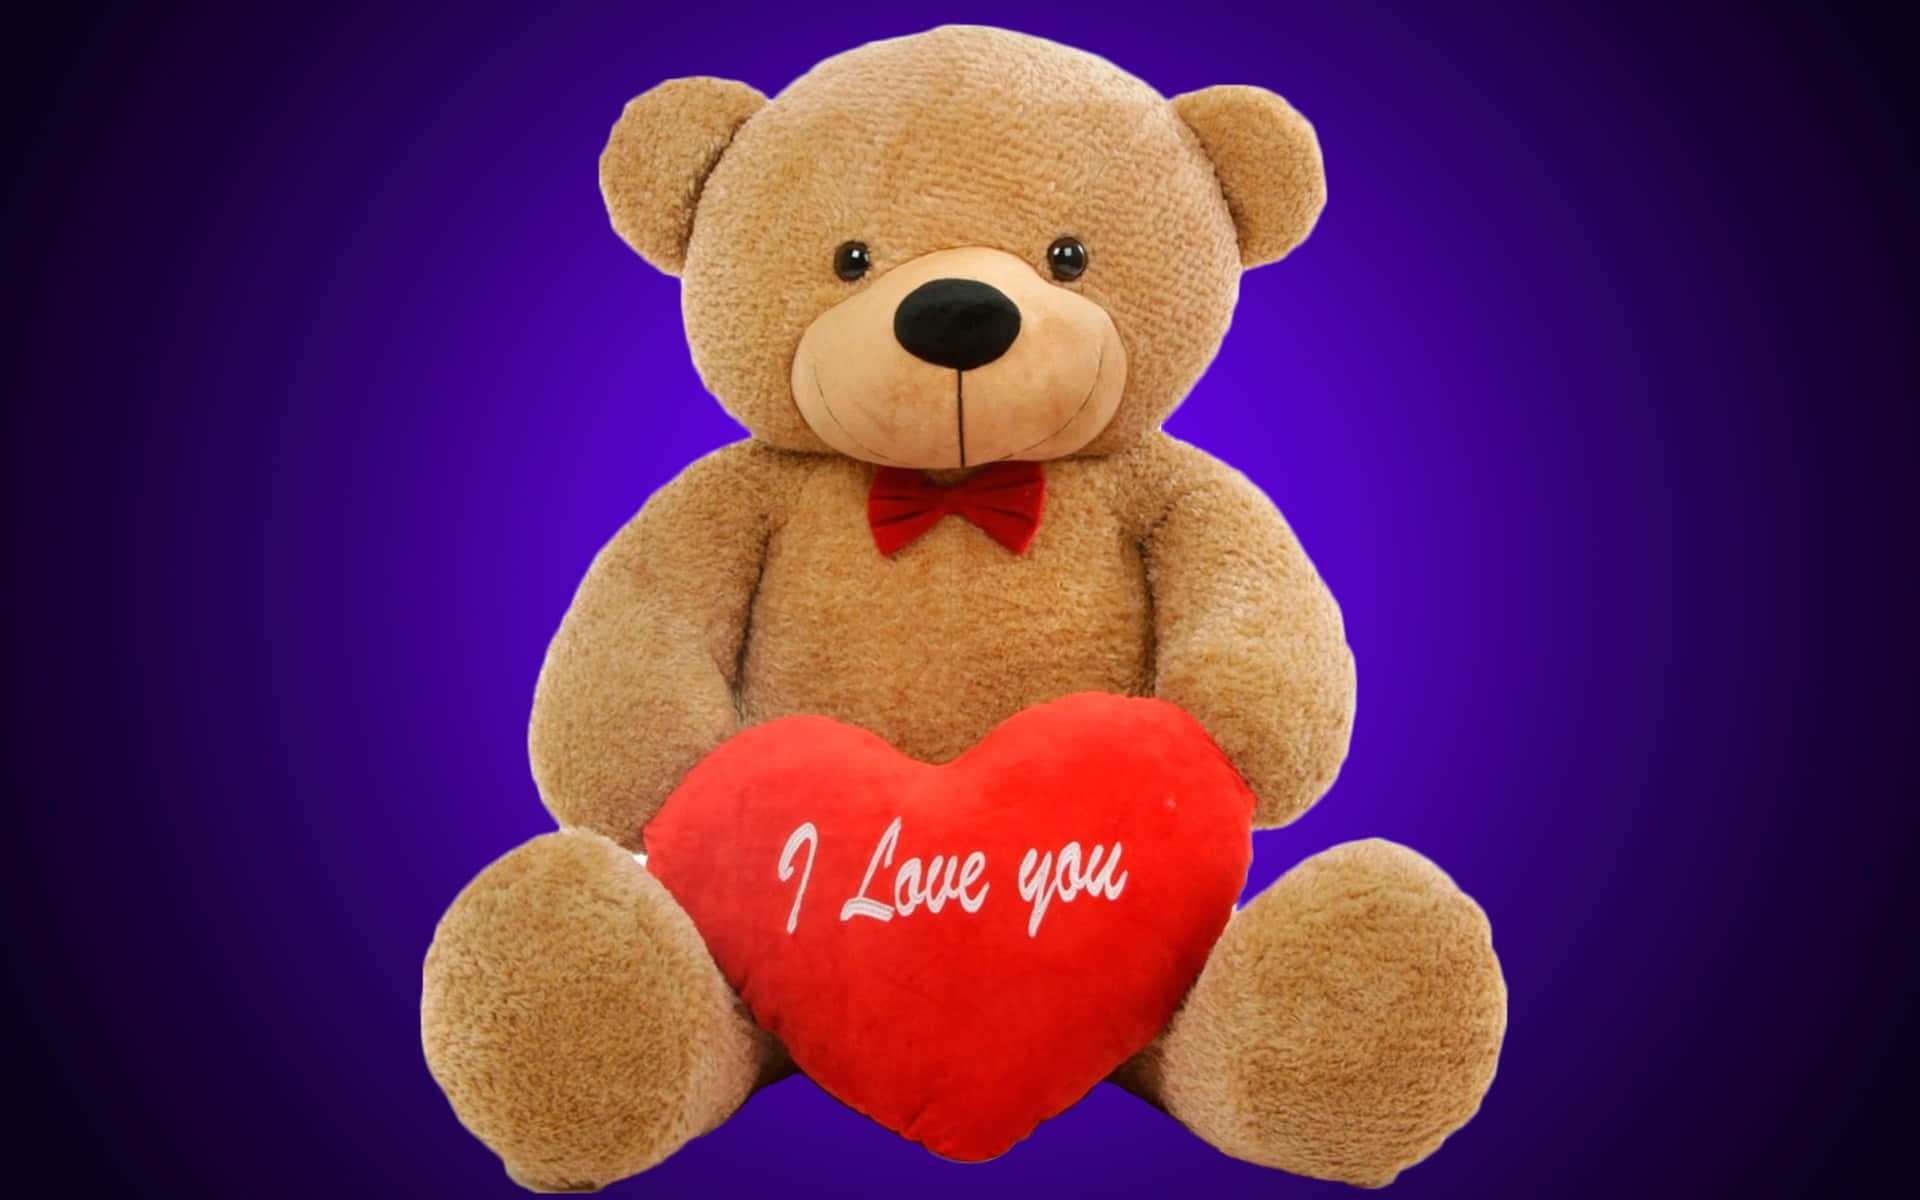 A Teddy Bear Holding A Red Heart On A Purple Background